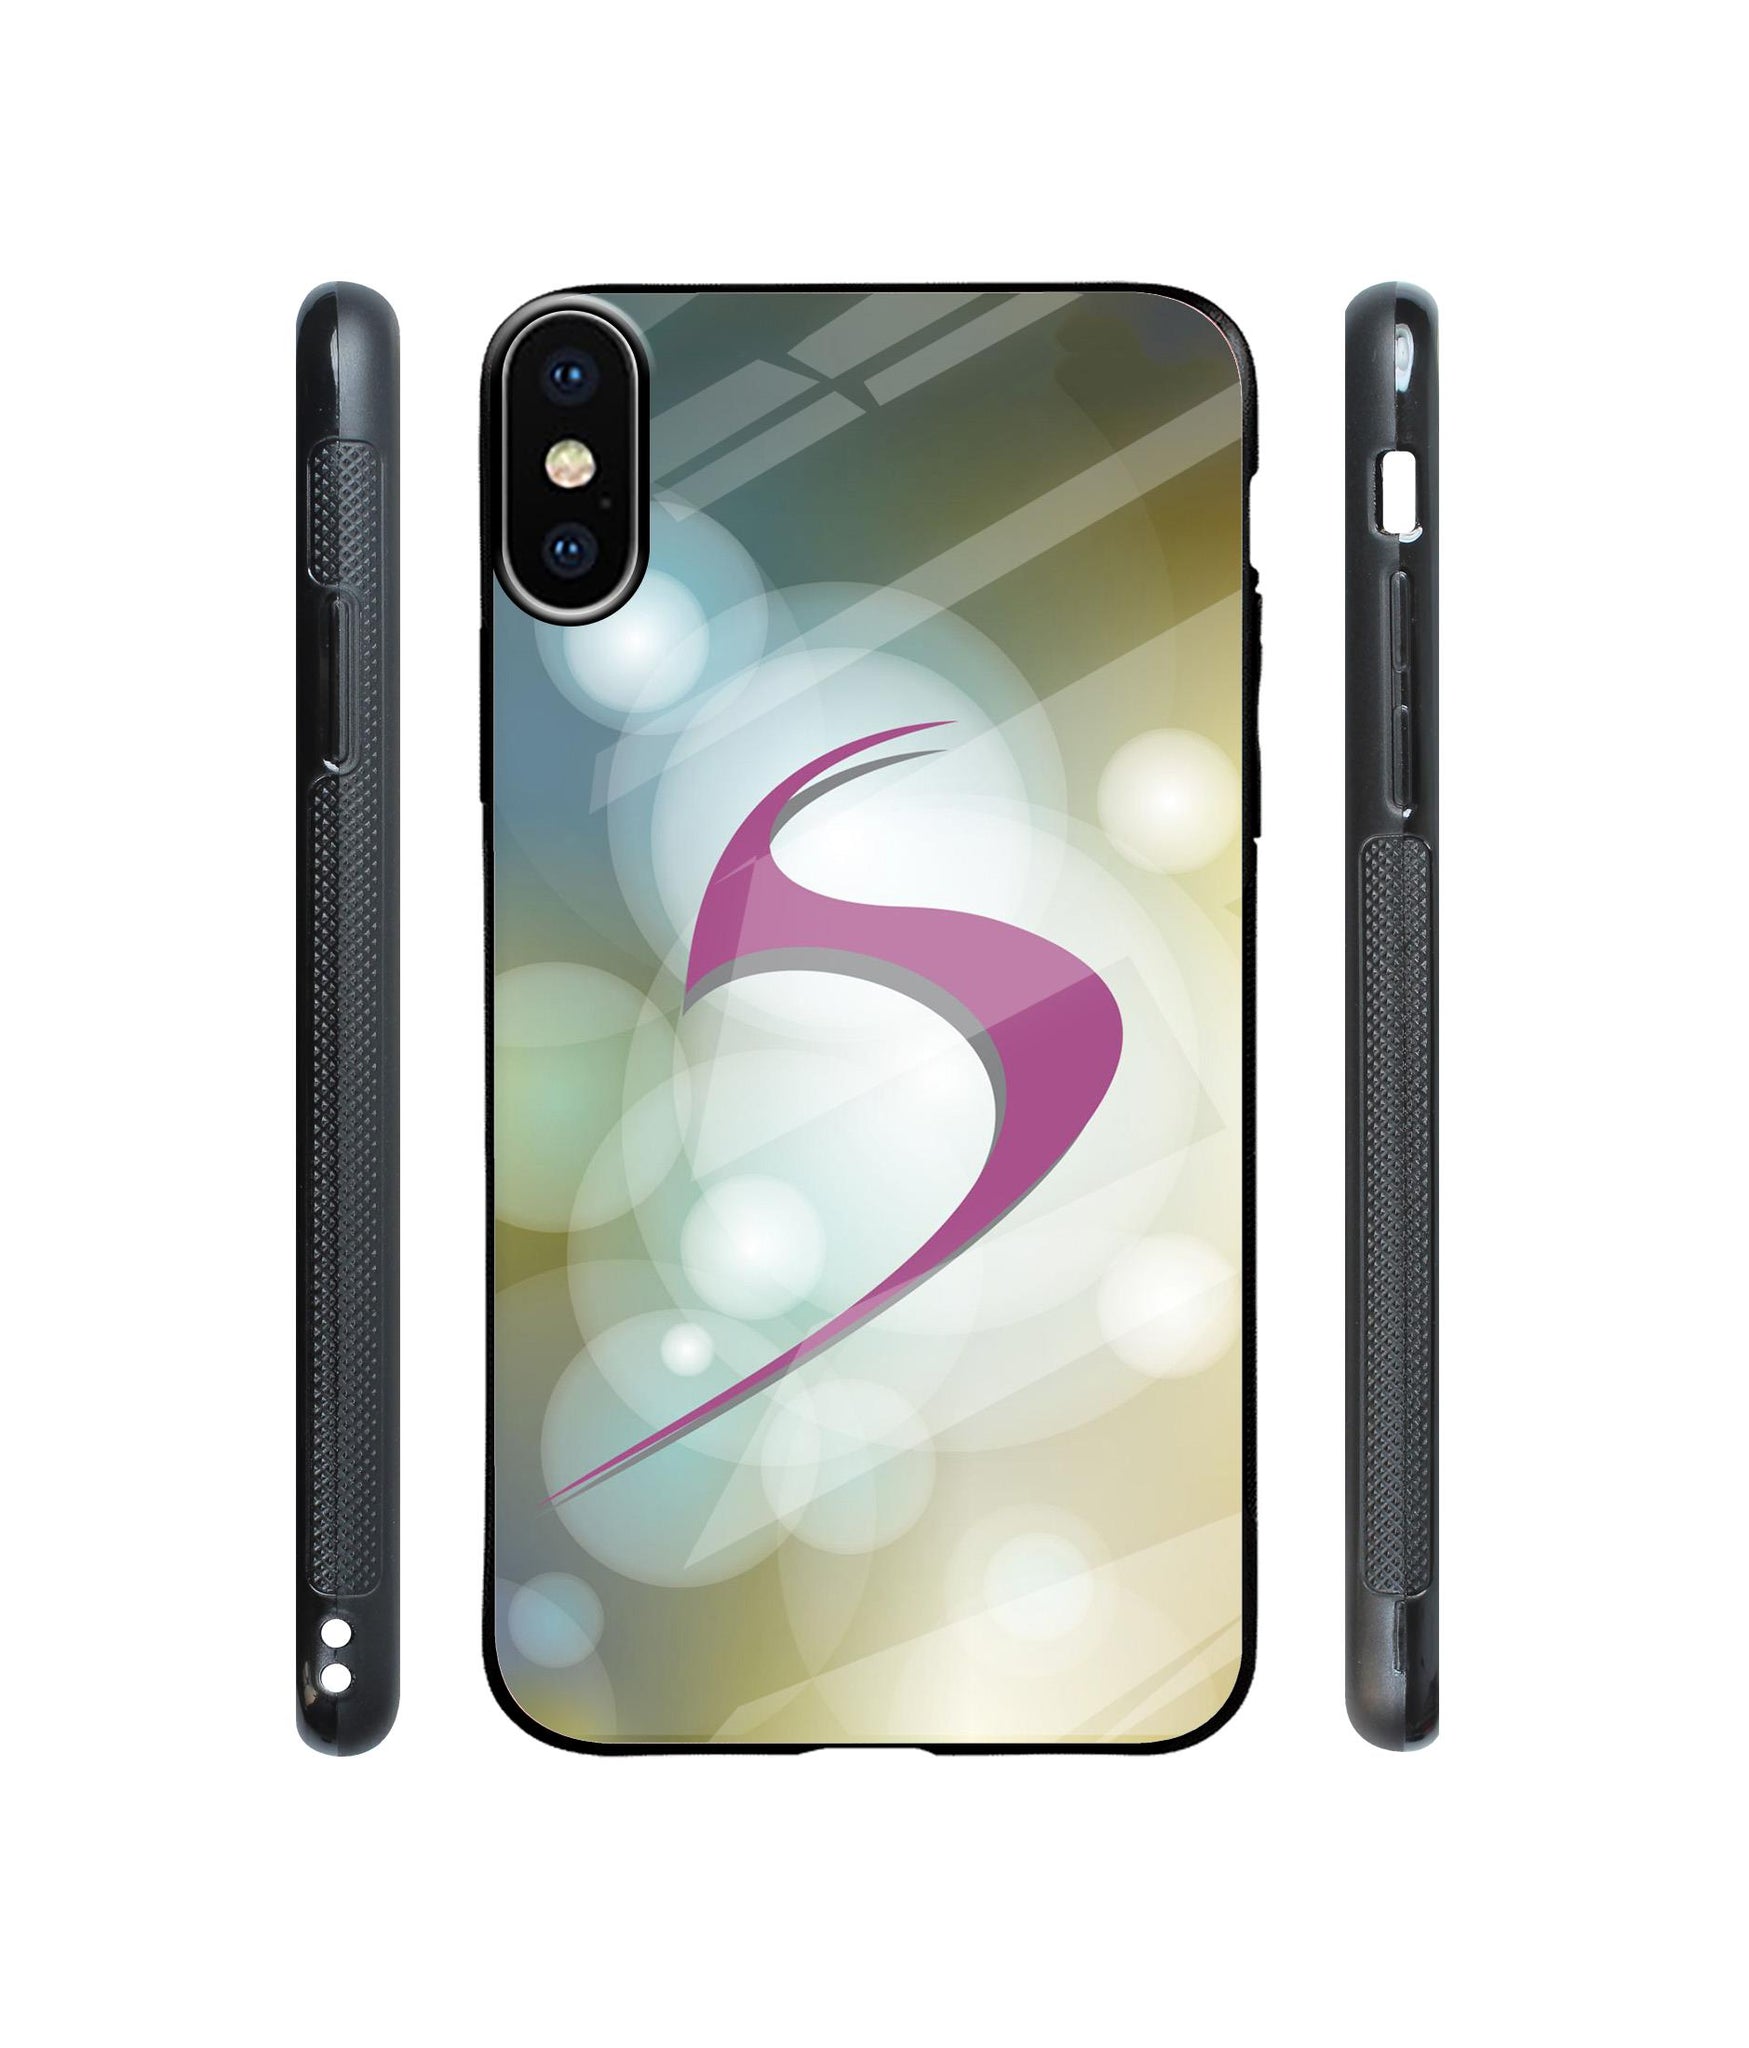 Keypad Designer Printed Glass Cover for Apple iPhone X / Xs